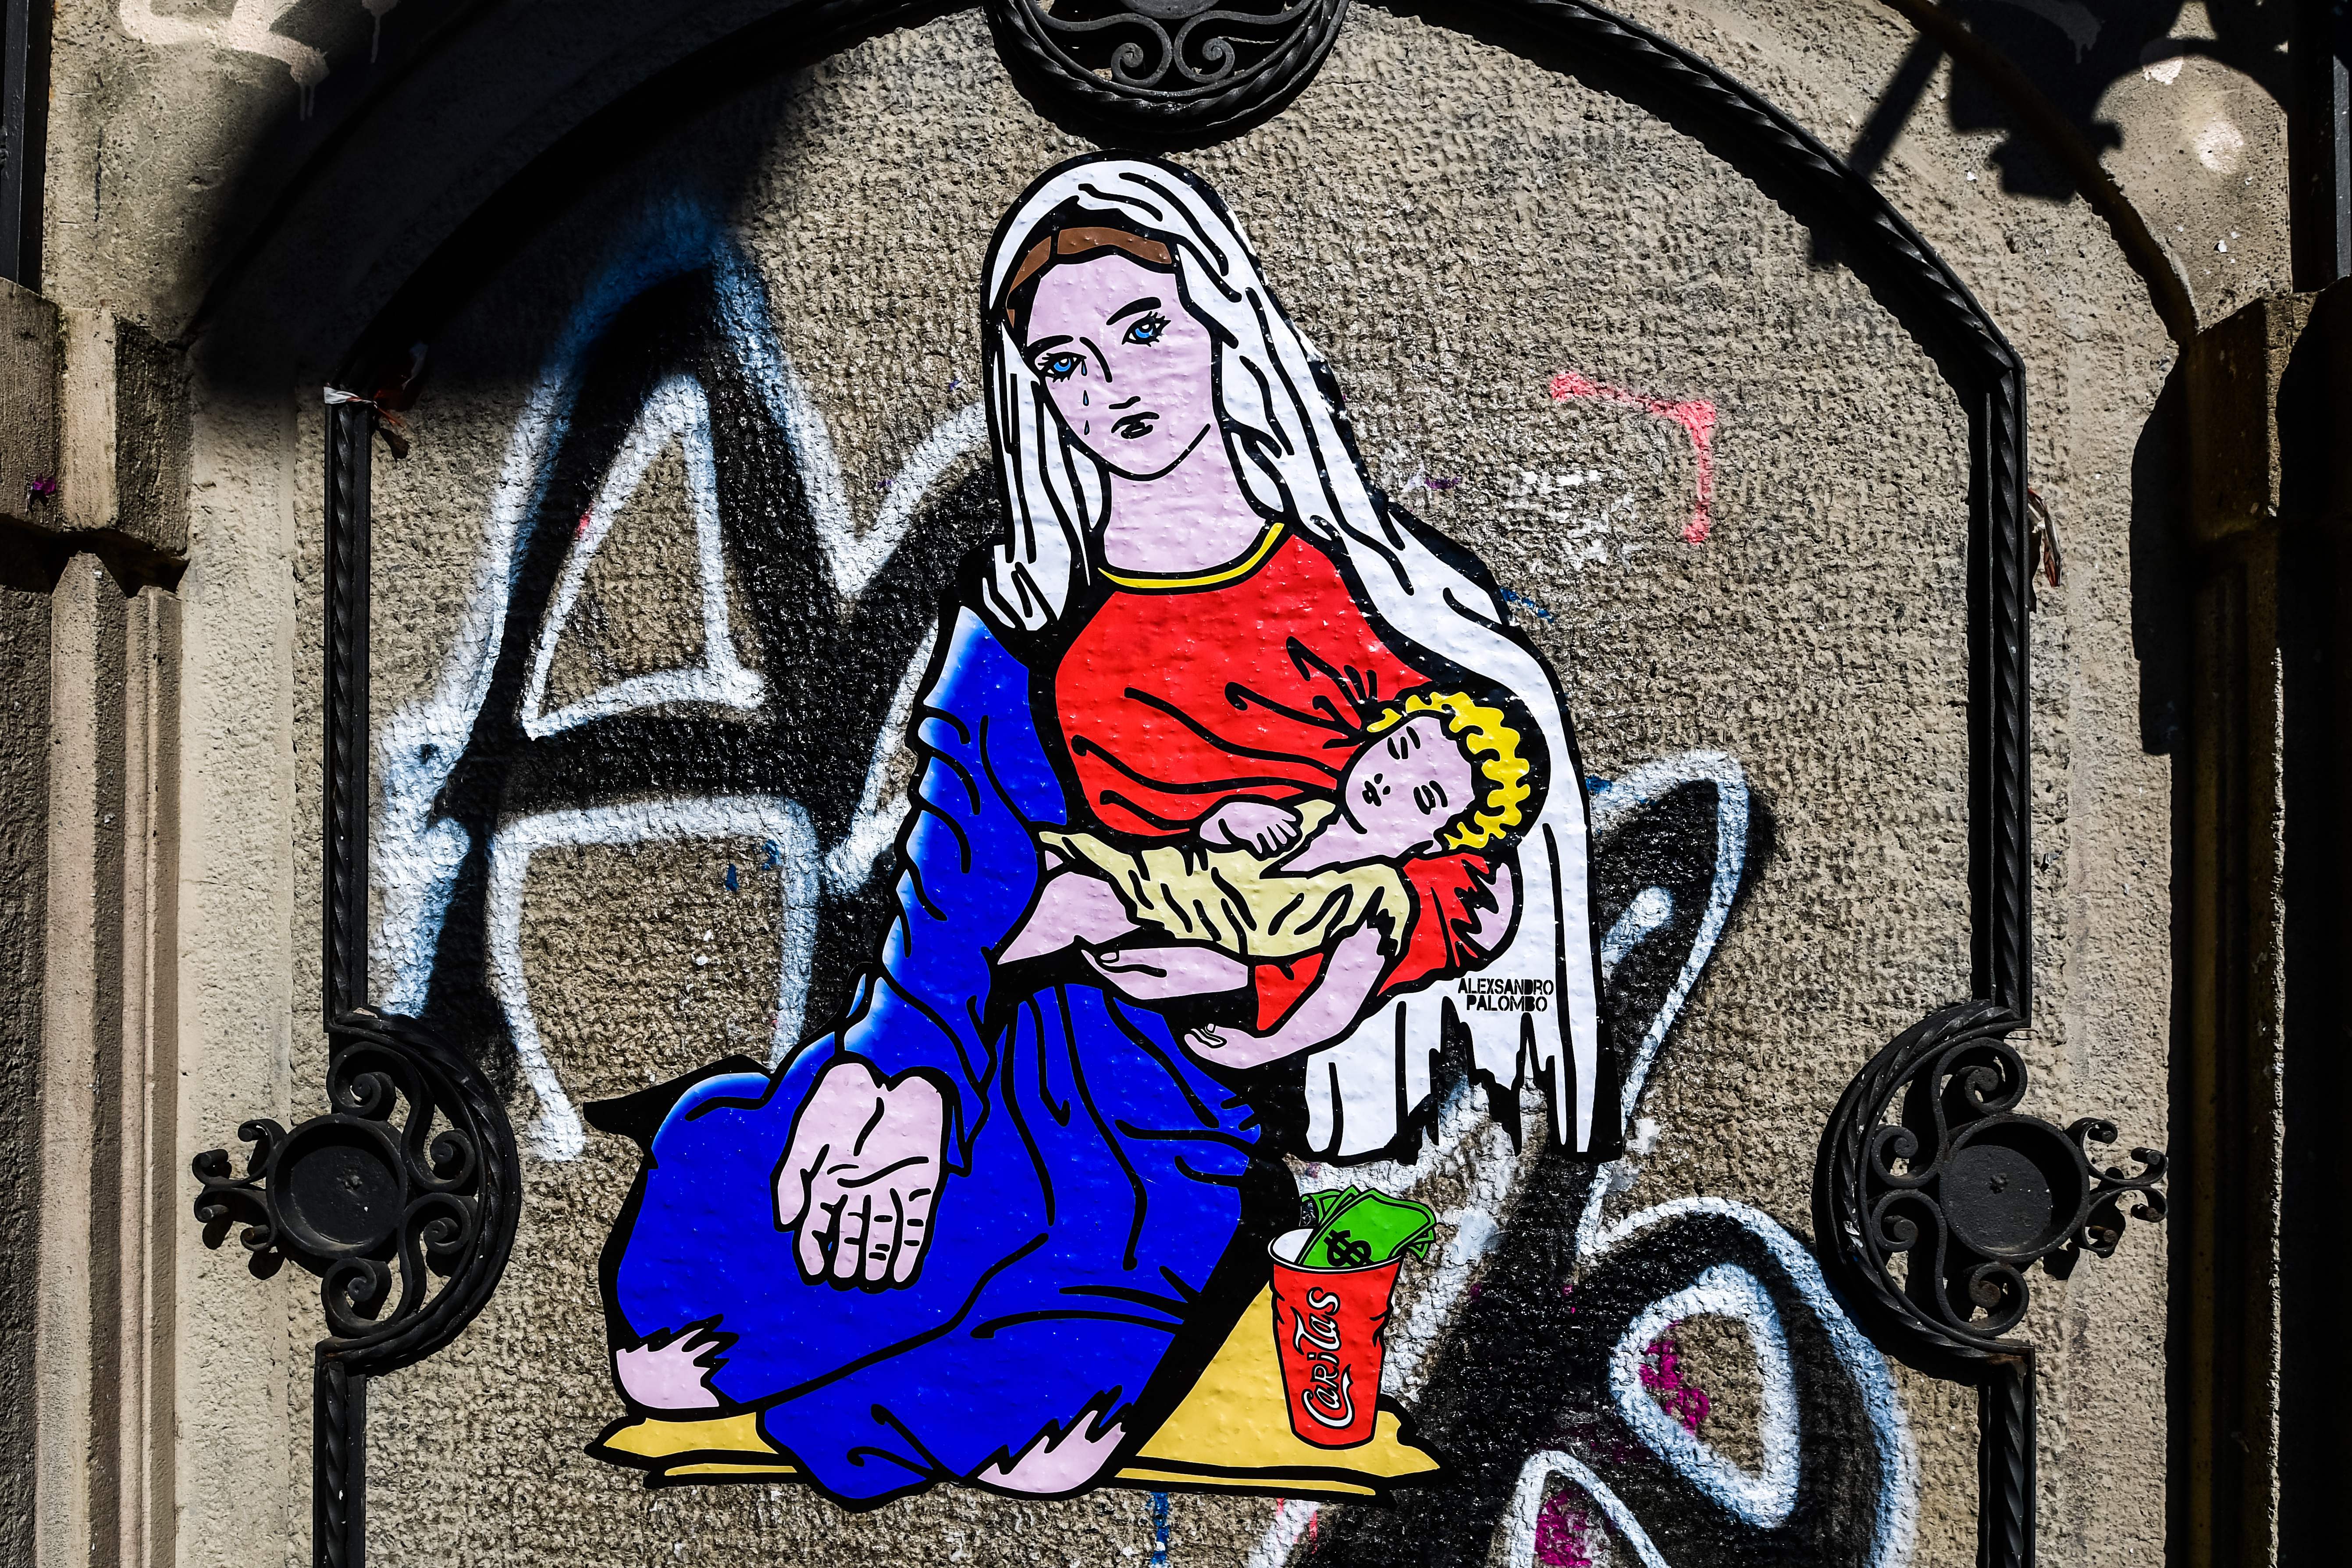 Street art in Milan highlighting issue of poverty in the city